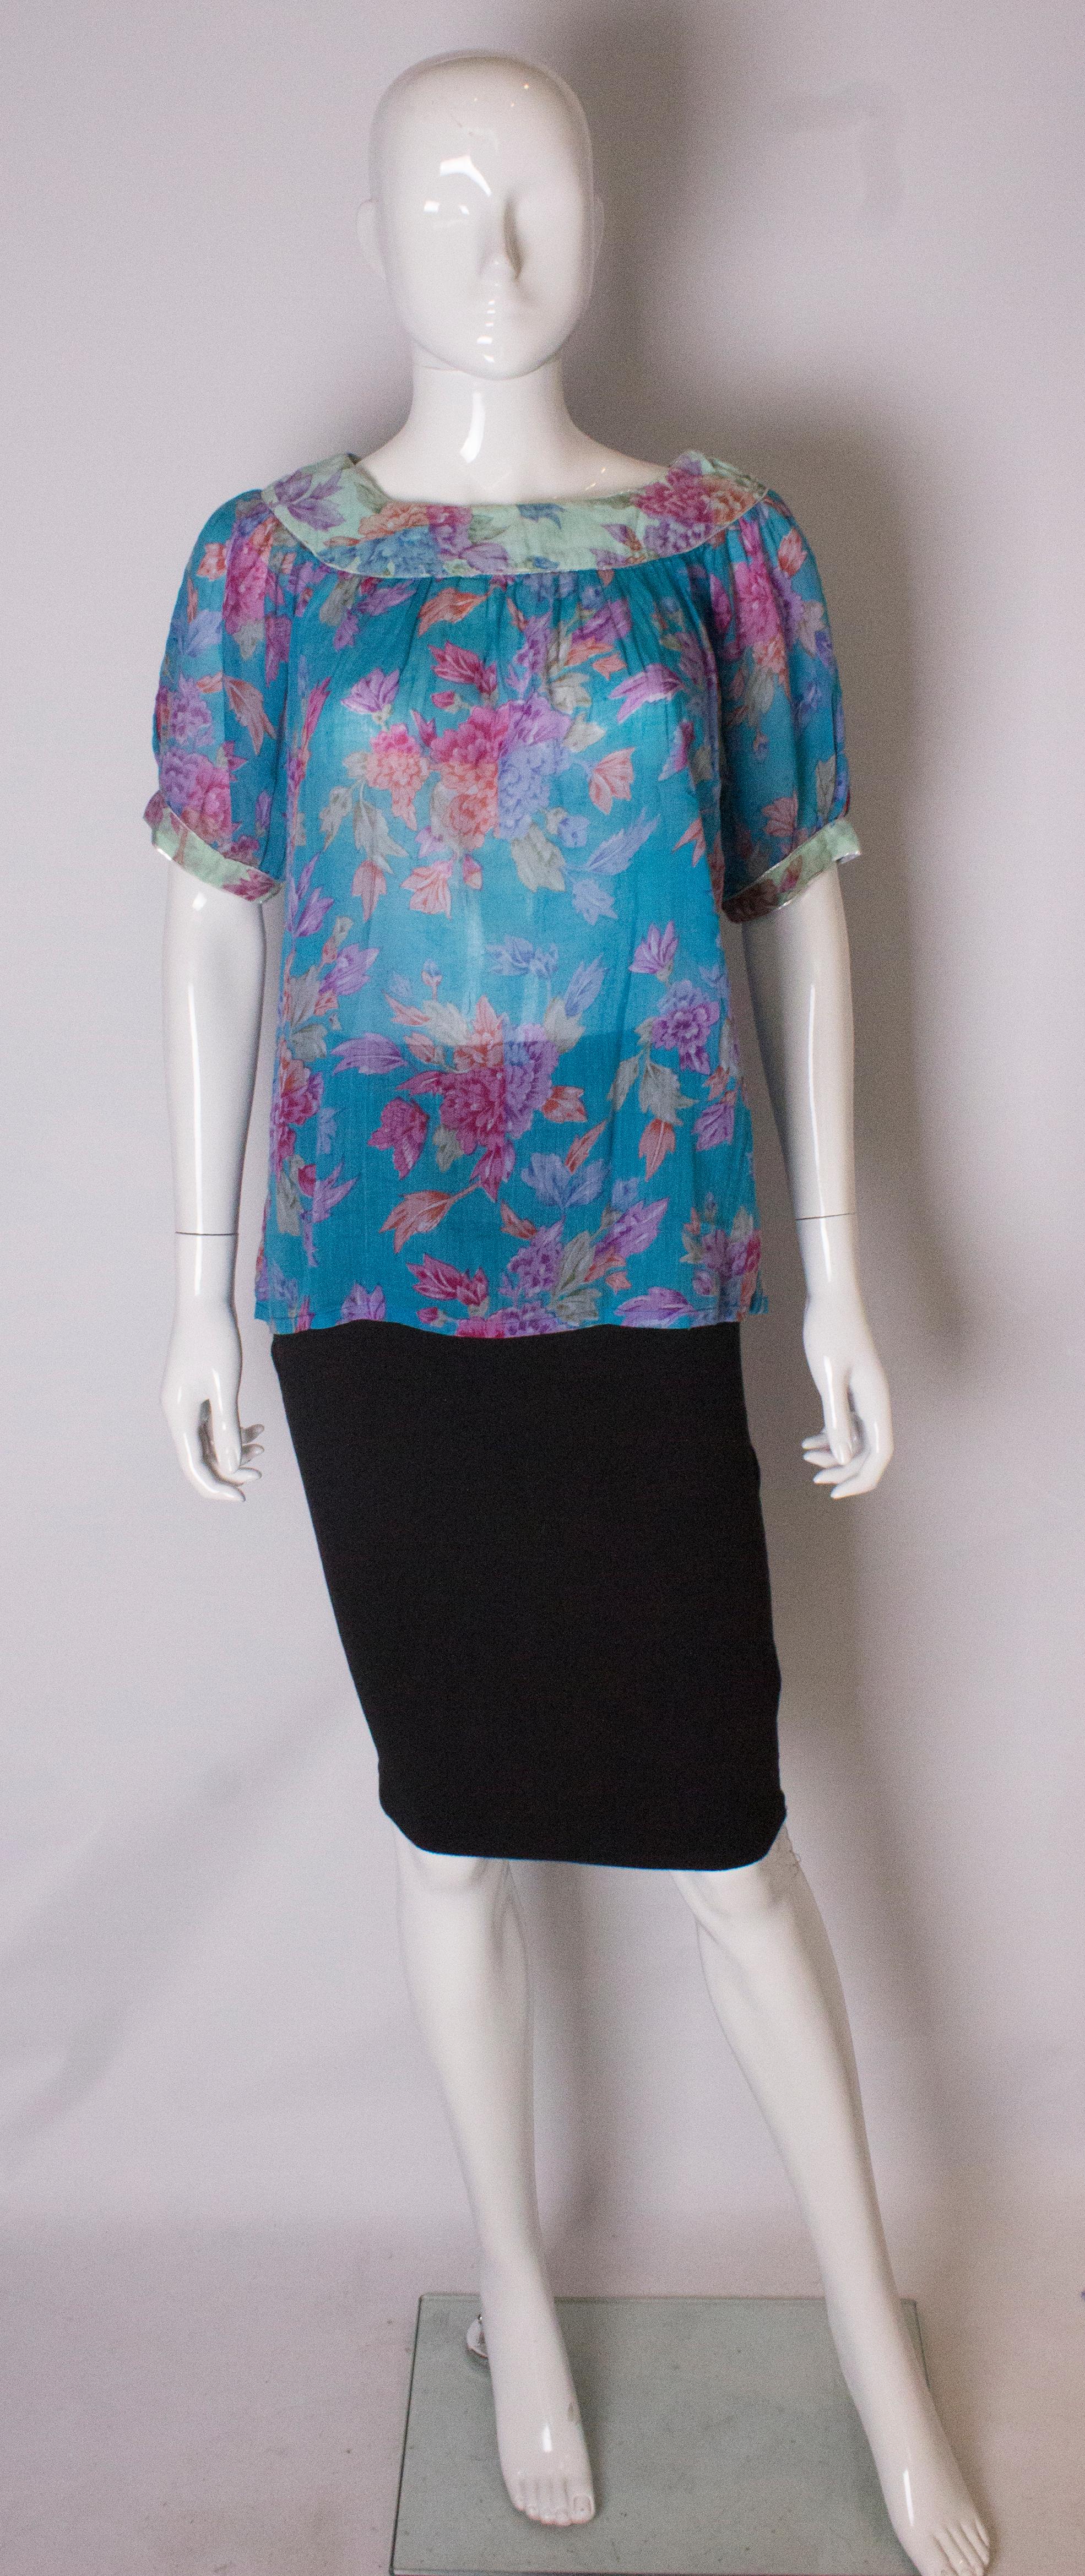 A pretty vintage cotton top by Phool. In a pretty floral print the top has a scoop neck with metallic trim, and puff elbow length sleaves with contrasting fabric.